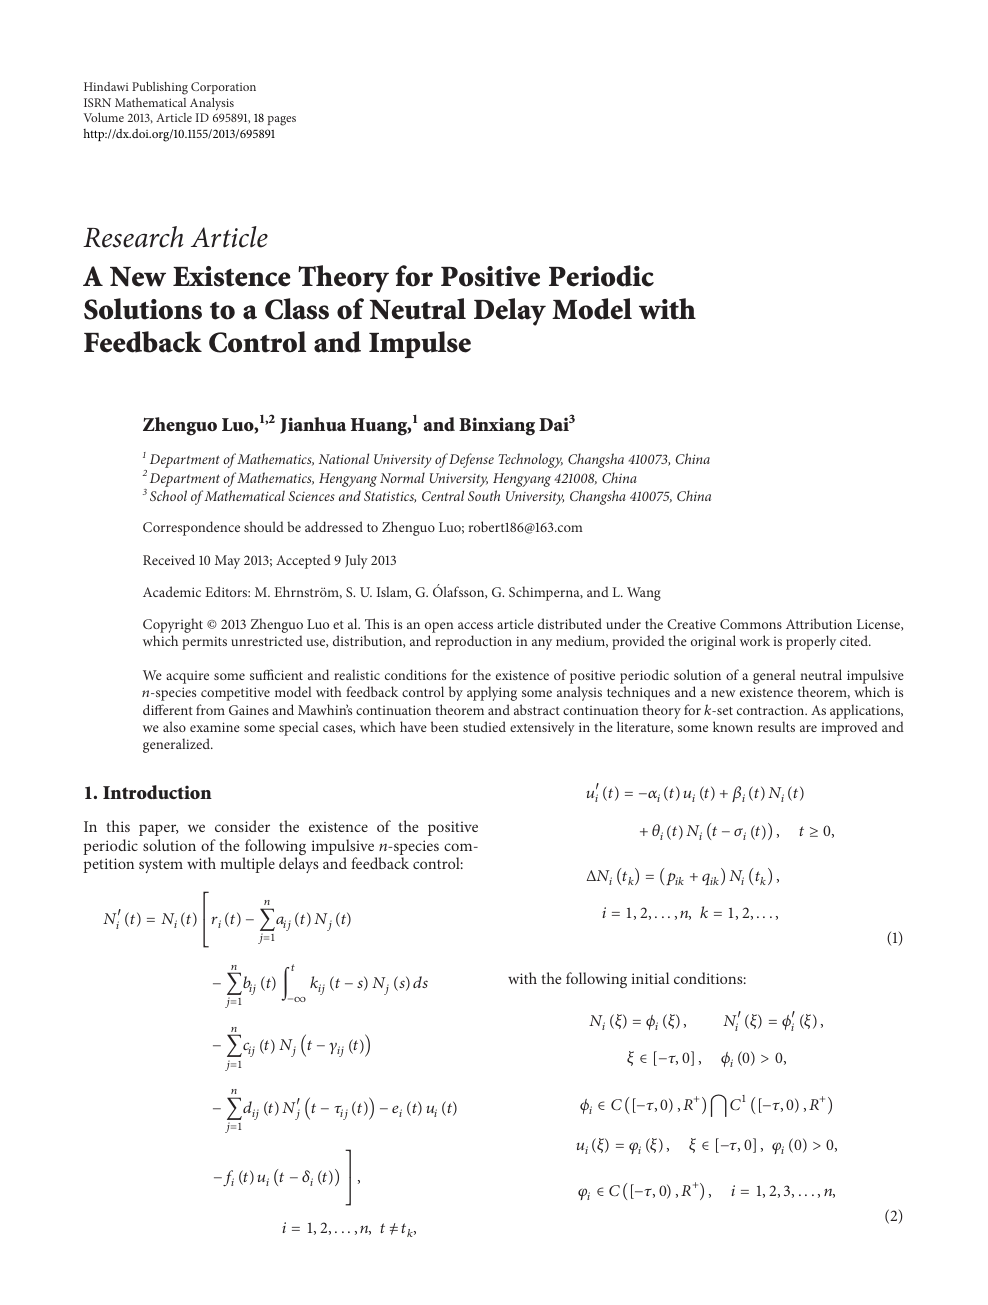 A New Existence Theory For Positive Periodic Solutions To A Class Of Neutral Delay Model With Feedback Control And Impulse Topic Of Research Paper In Mathematics Download Scholarly Article Pdf And